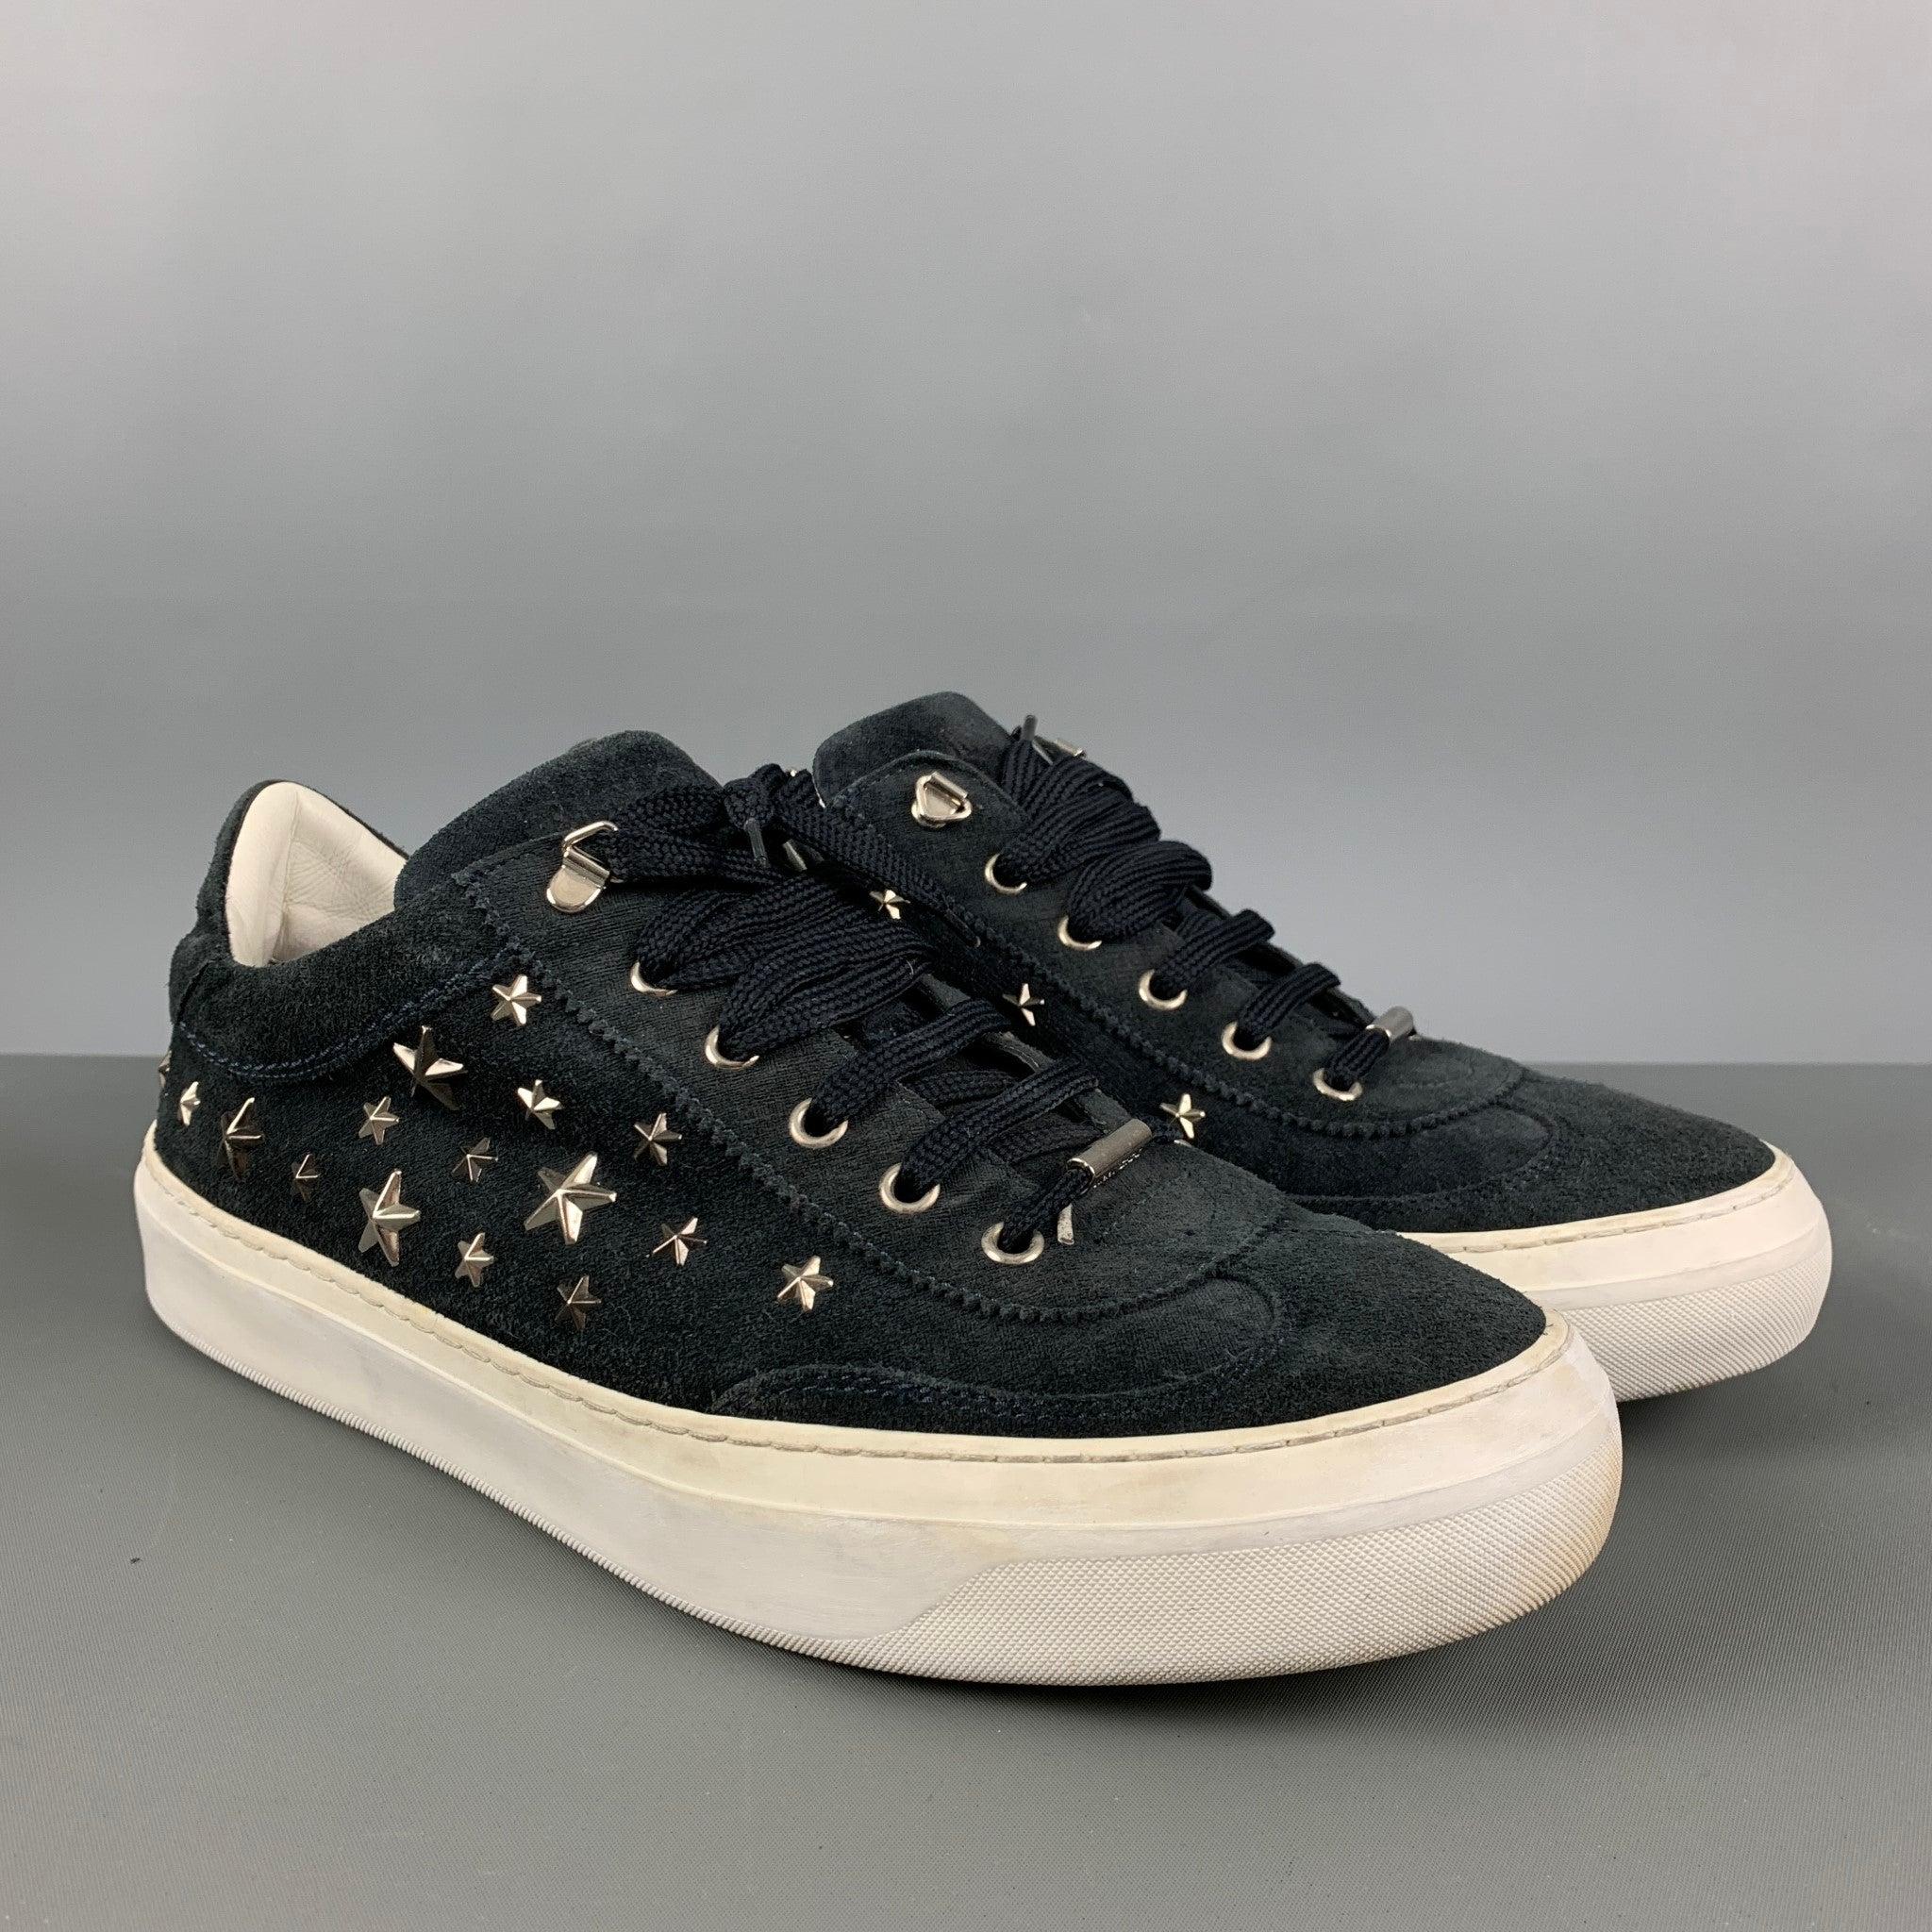 JIMMY CHOO sneakers comes in a black suede featuring silver stars details, rubber sole, and a lace up closure. Made in Italy.Good Pre-Owned Condition. 

Marked:   43Outsole: 12 inches  x 4.25 inches  
  
  
 
Reference: 124642
Category: